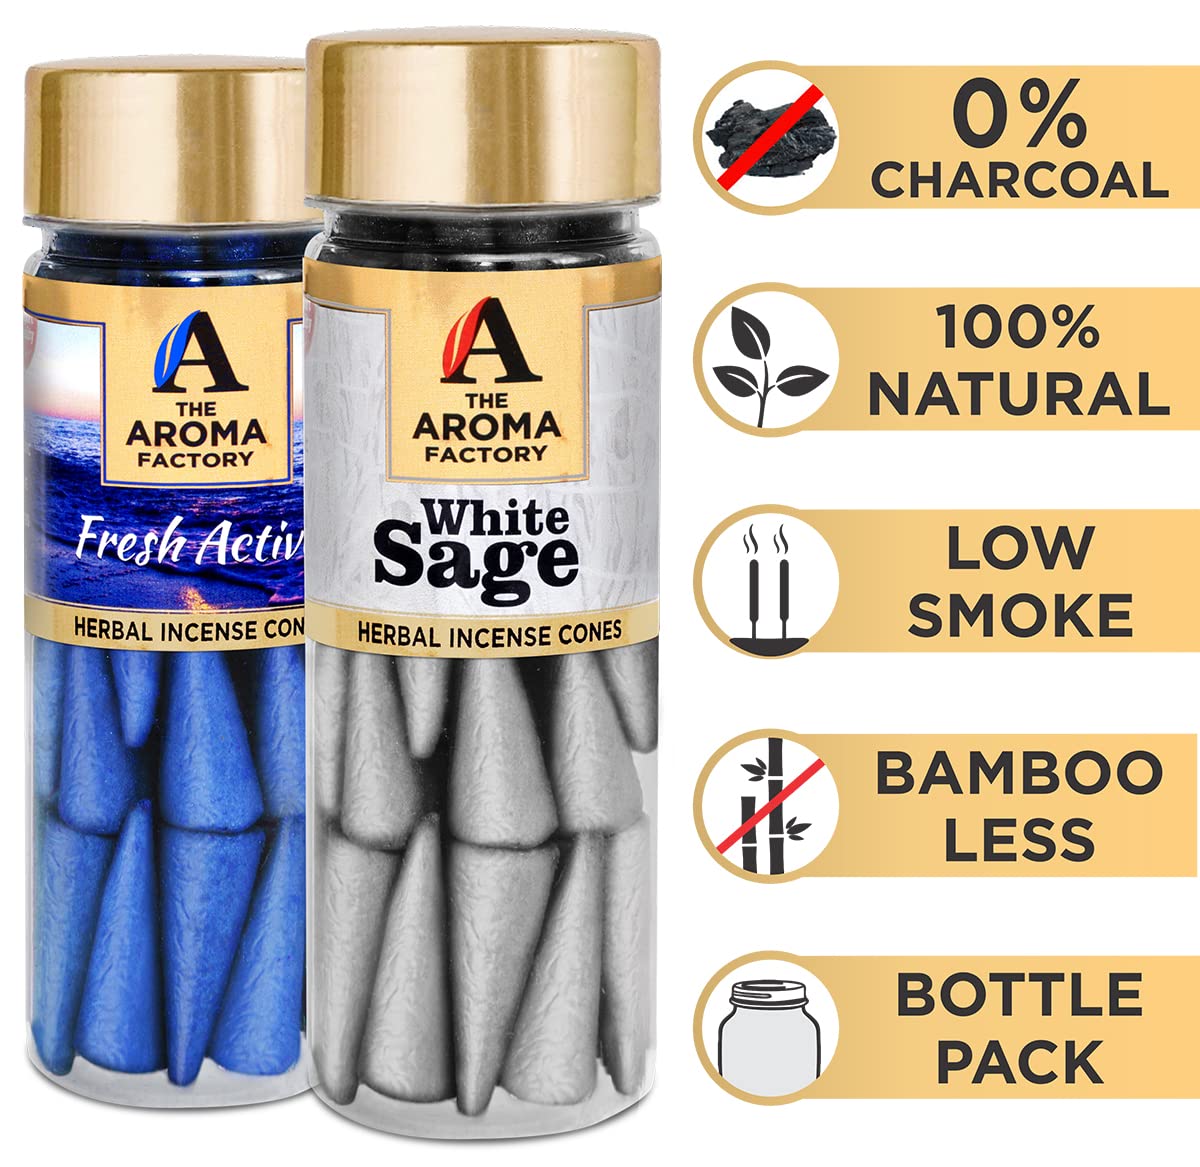 The Aroma Factory Incense Dhoop Cone for Pooja, White Sage & Fresh Active (100% Herbal & 0% Charcoal) 2 Bottles x 30 Cones